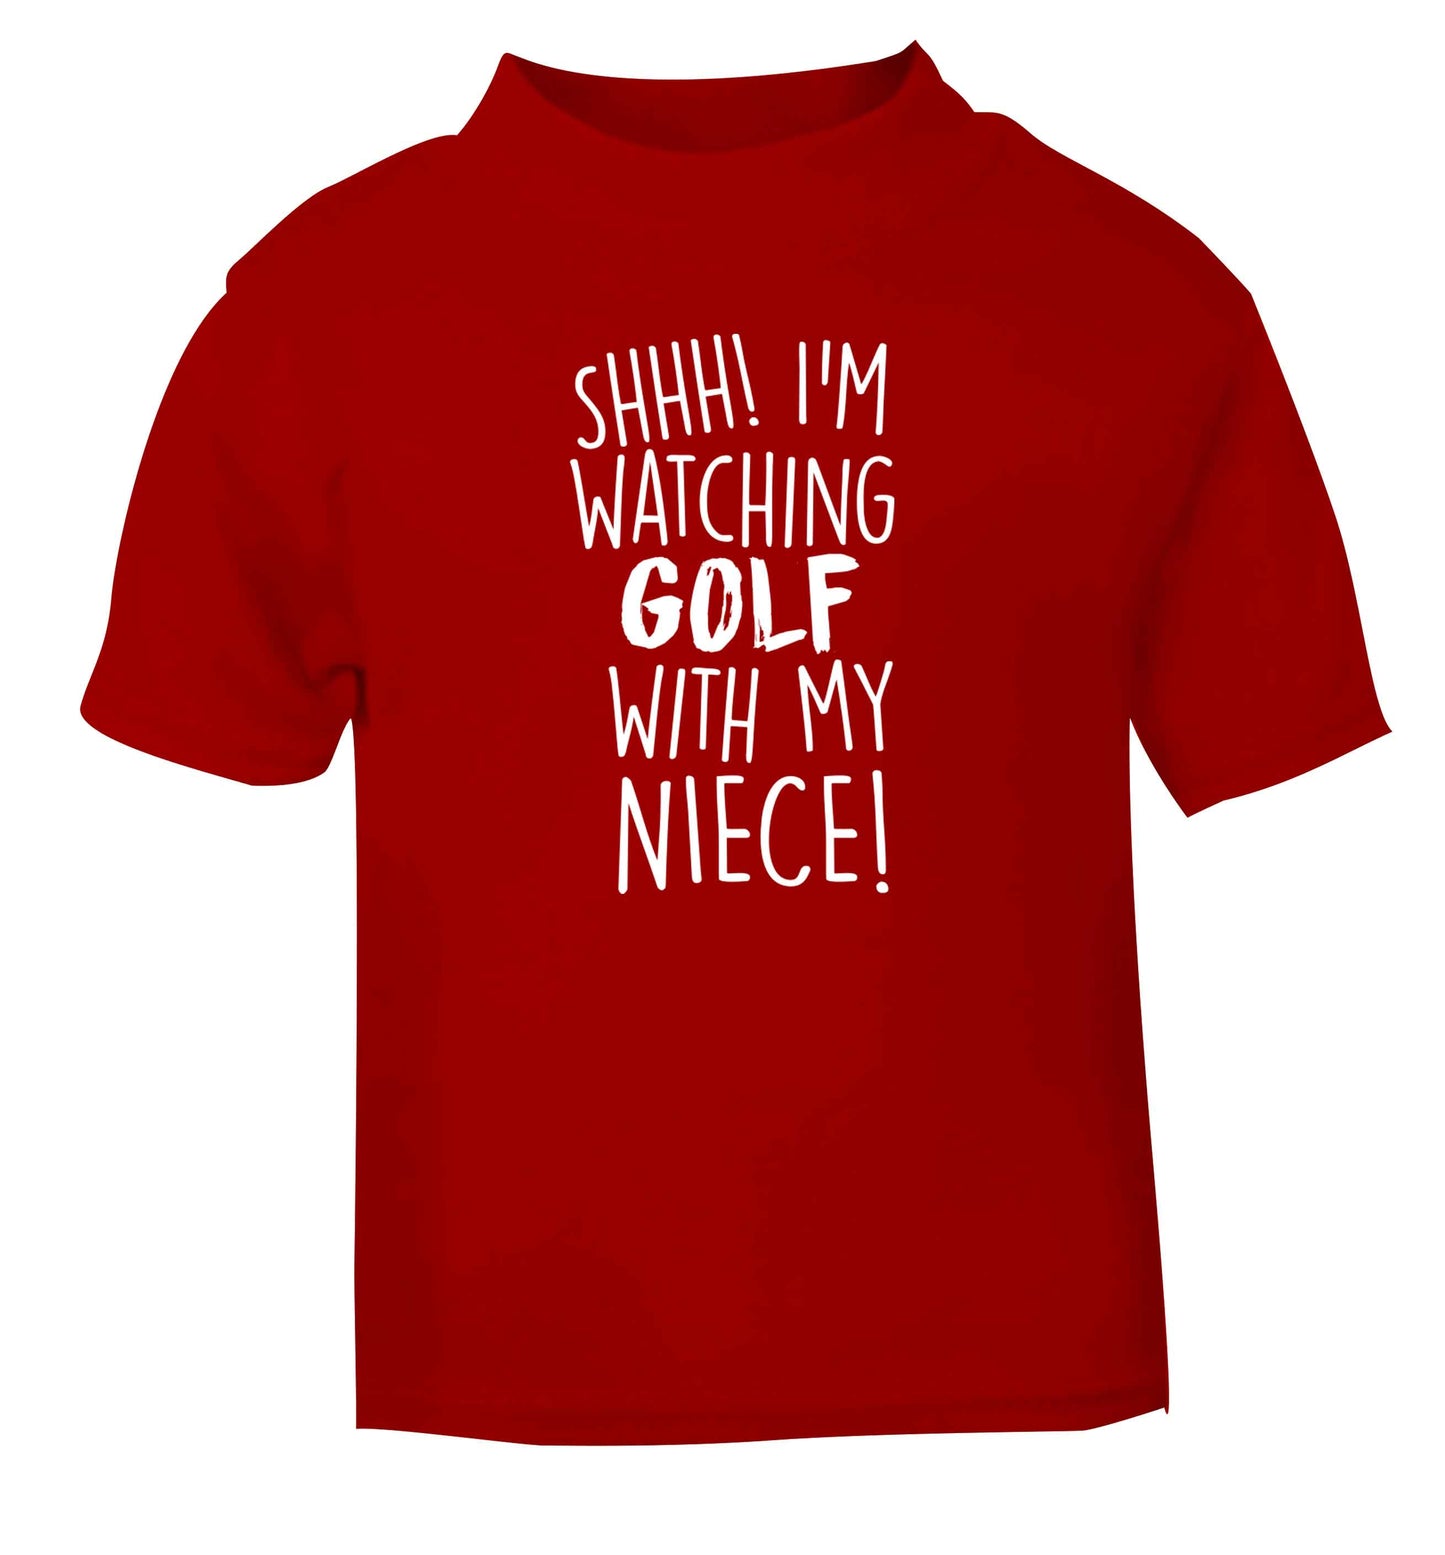 Shh I'm watching golf with my niece red Baby Toddler Tshirt 2 Years